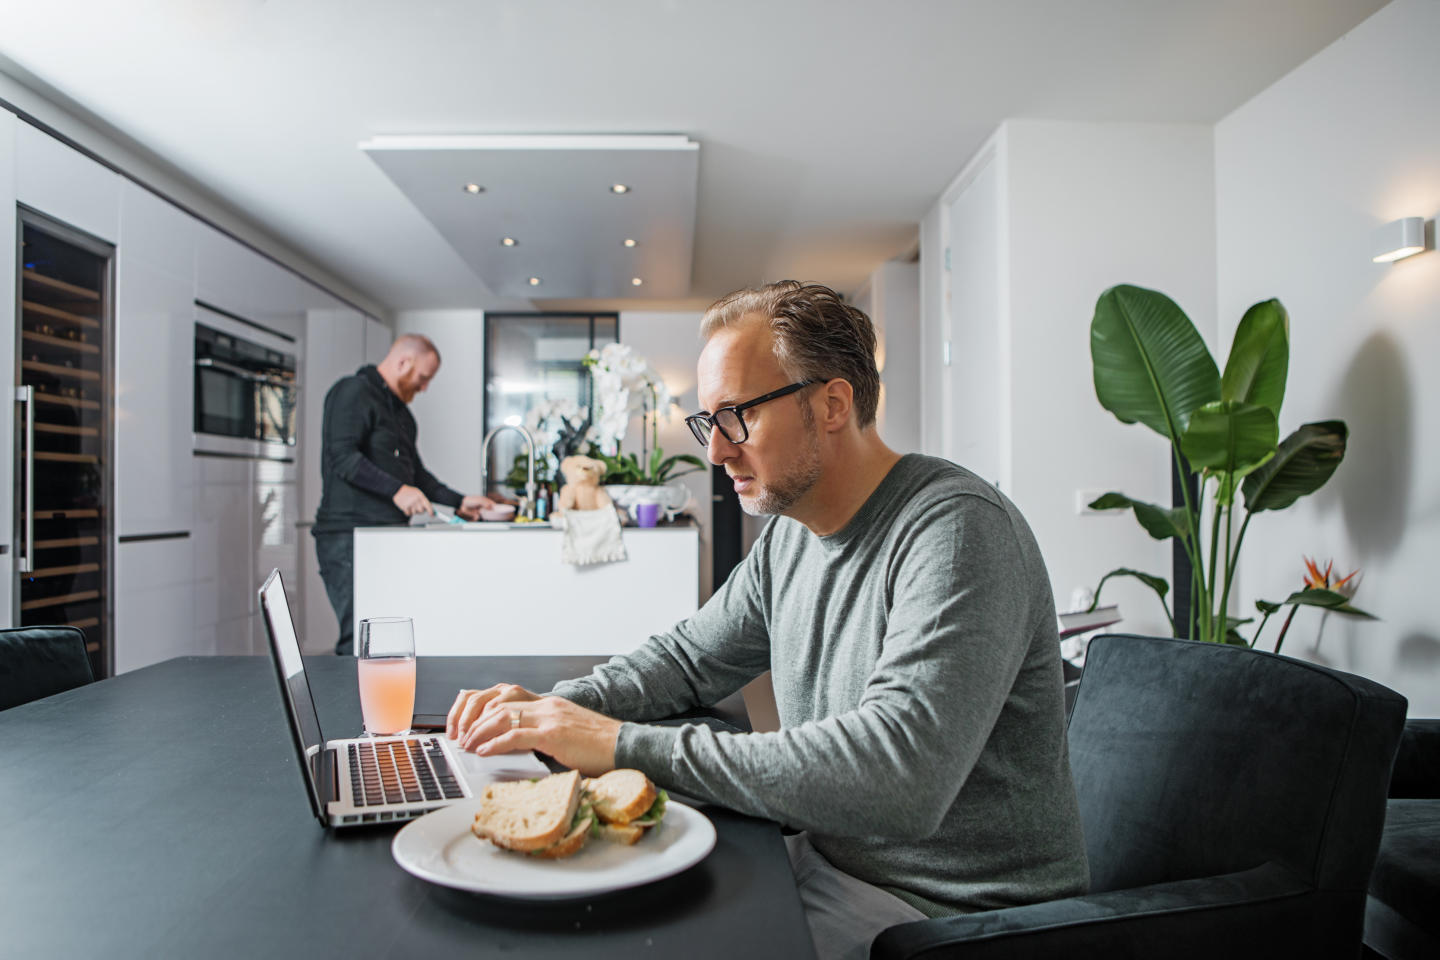 Man working on laptop on the kitchen table. Next to him is a sandwich on a plate, and we can see into the kitchen, where there's a man doing dishes